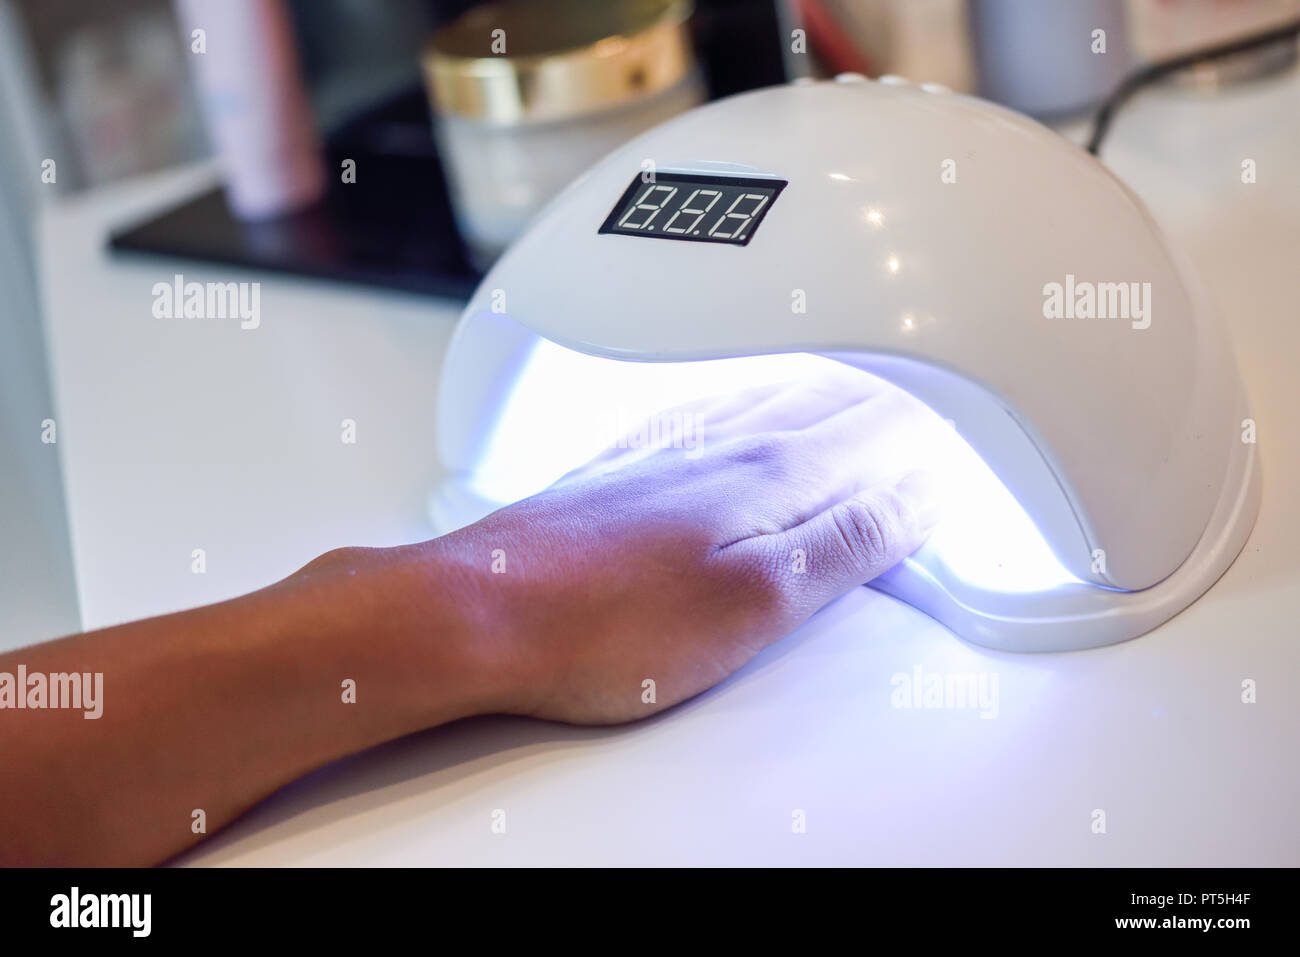 Manicured nails in UV lamp. Small nail art and manicure business. Hands of woman in a wellnes salon Stock Photo